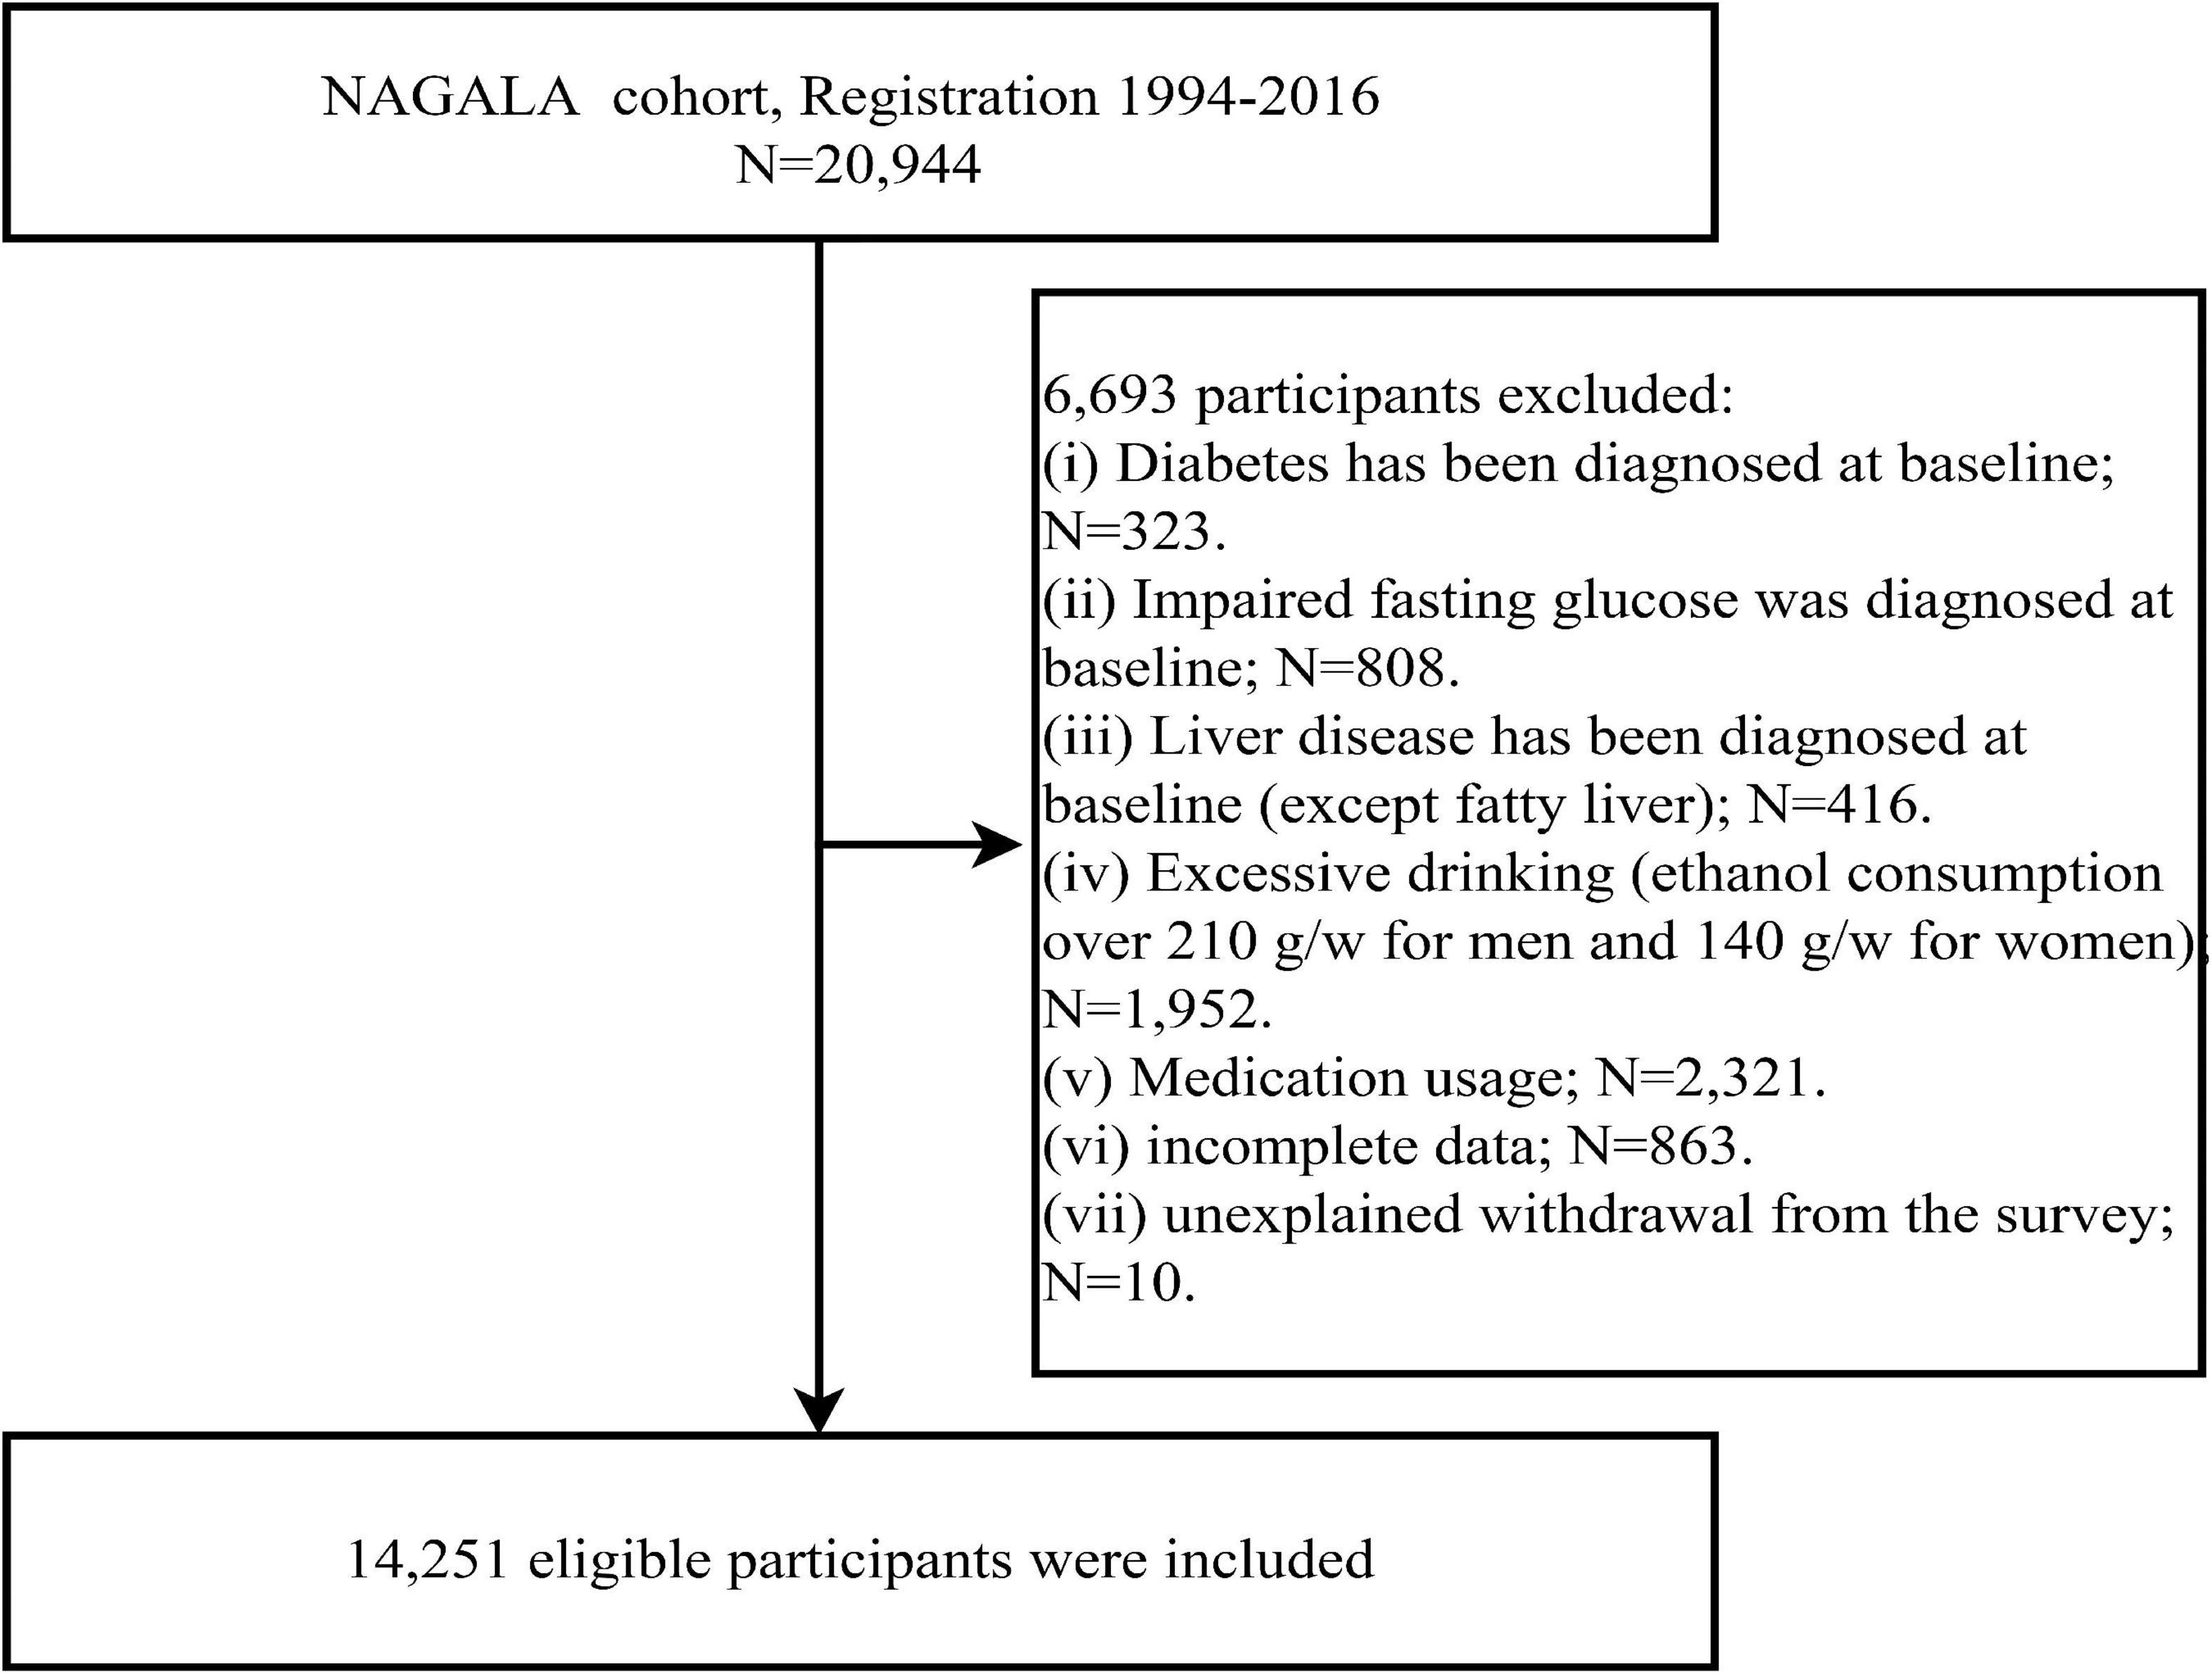 The role of predicted lean body mass and fat mass in non-alcoholic fatty liver disease in both sexes: Results from a secondary analysis of the NAGALA study